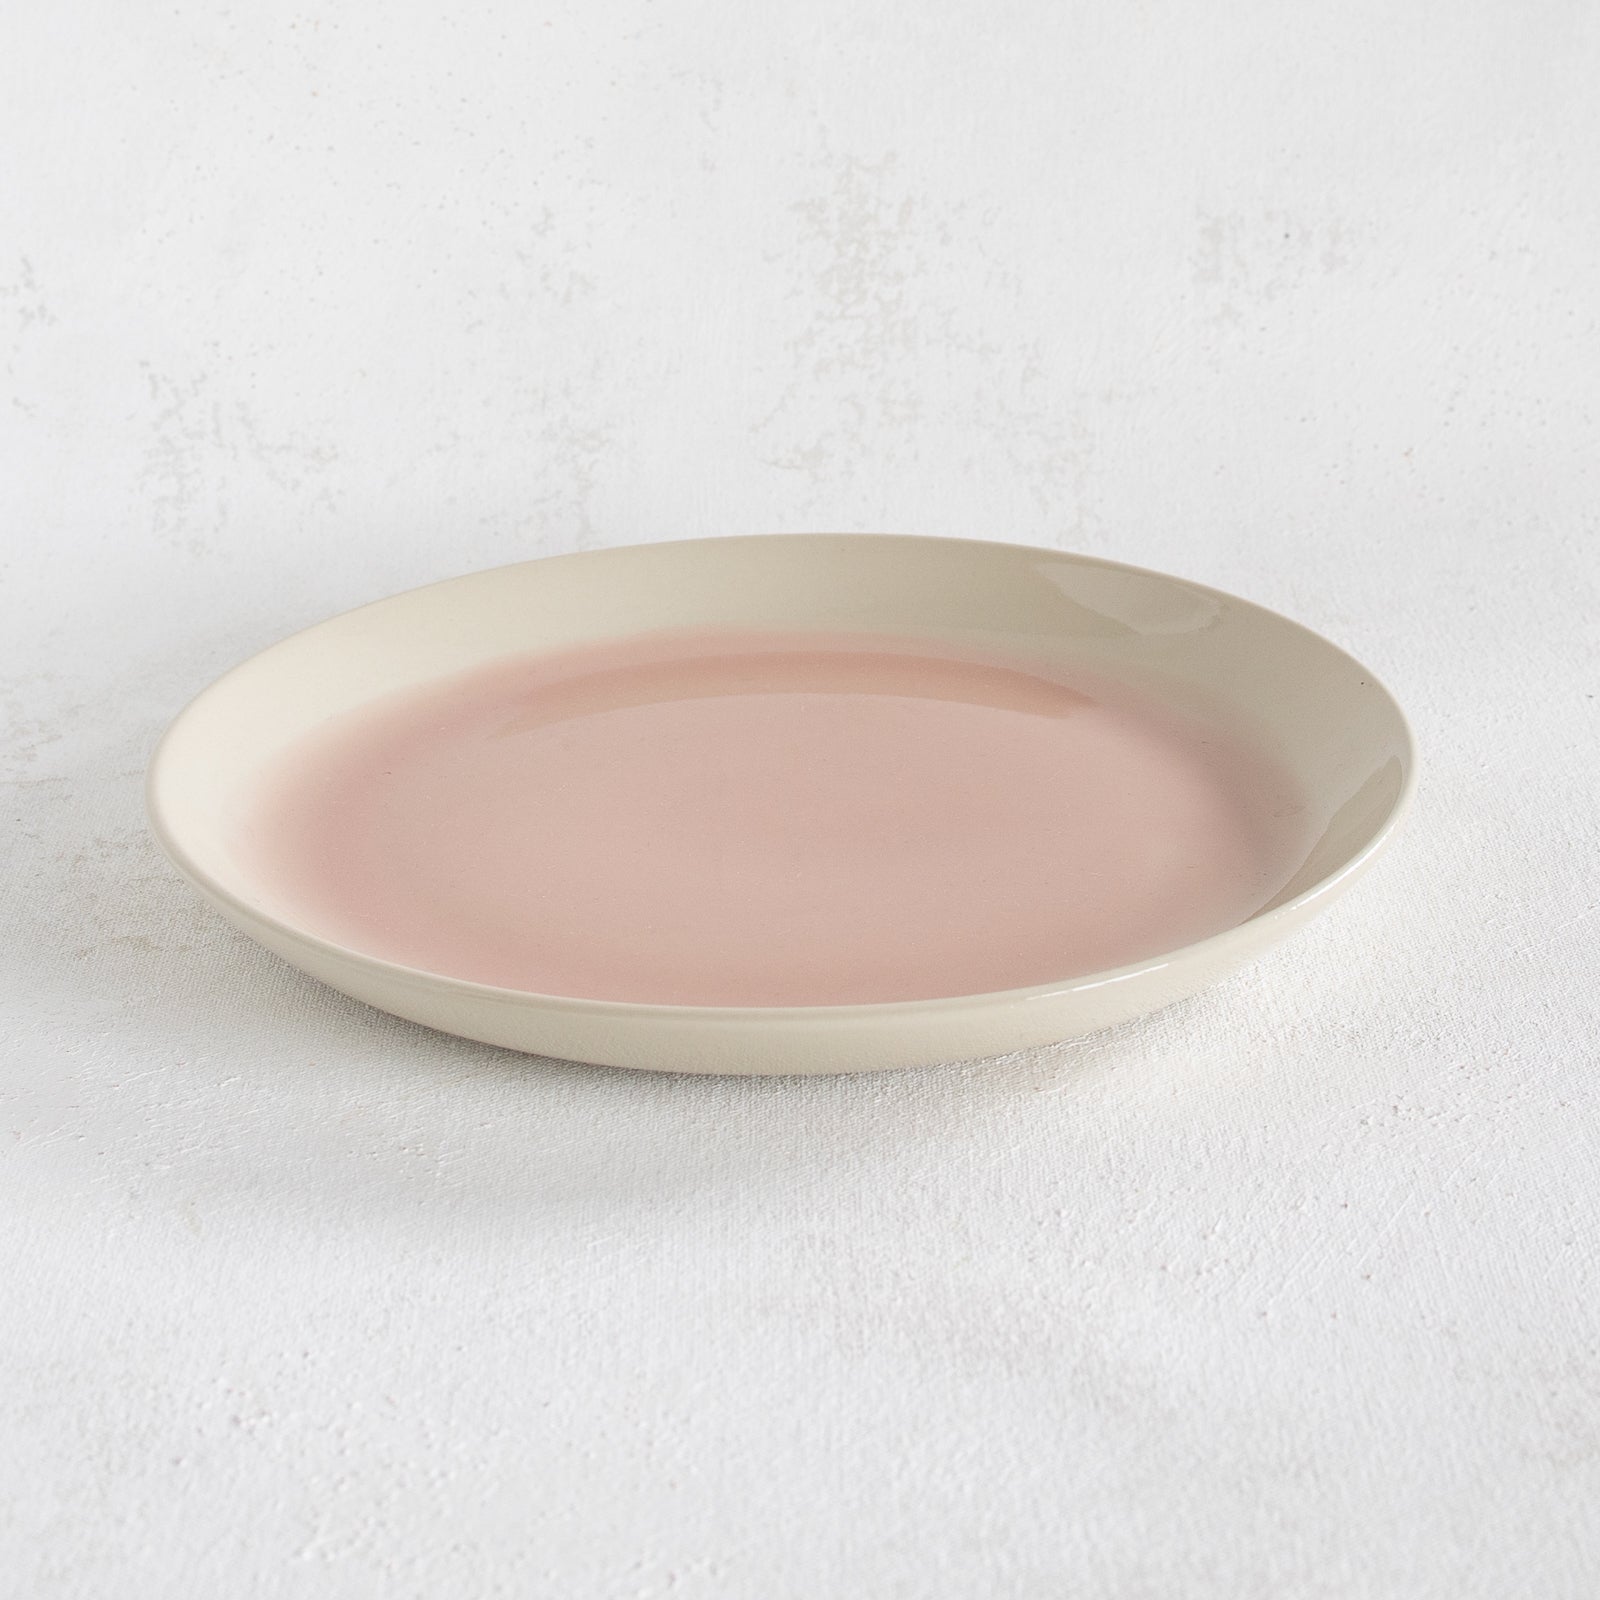 Rose Dinnerware Collection